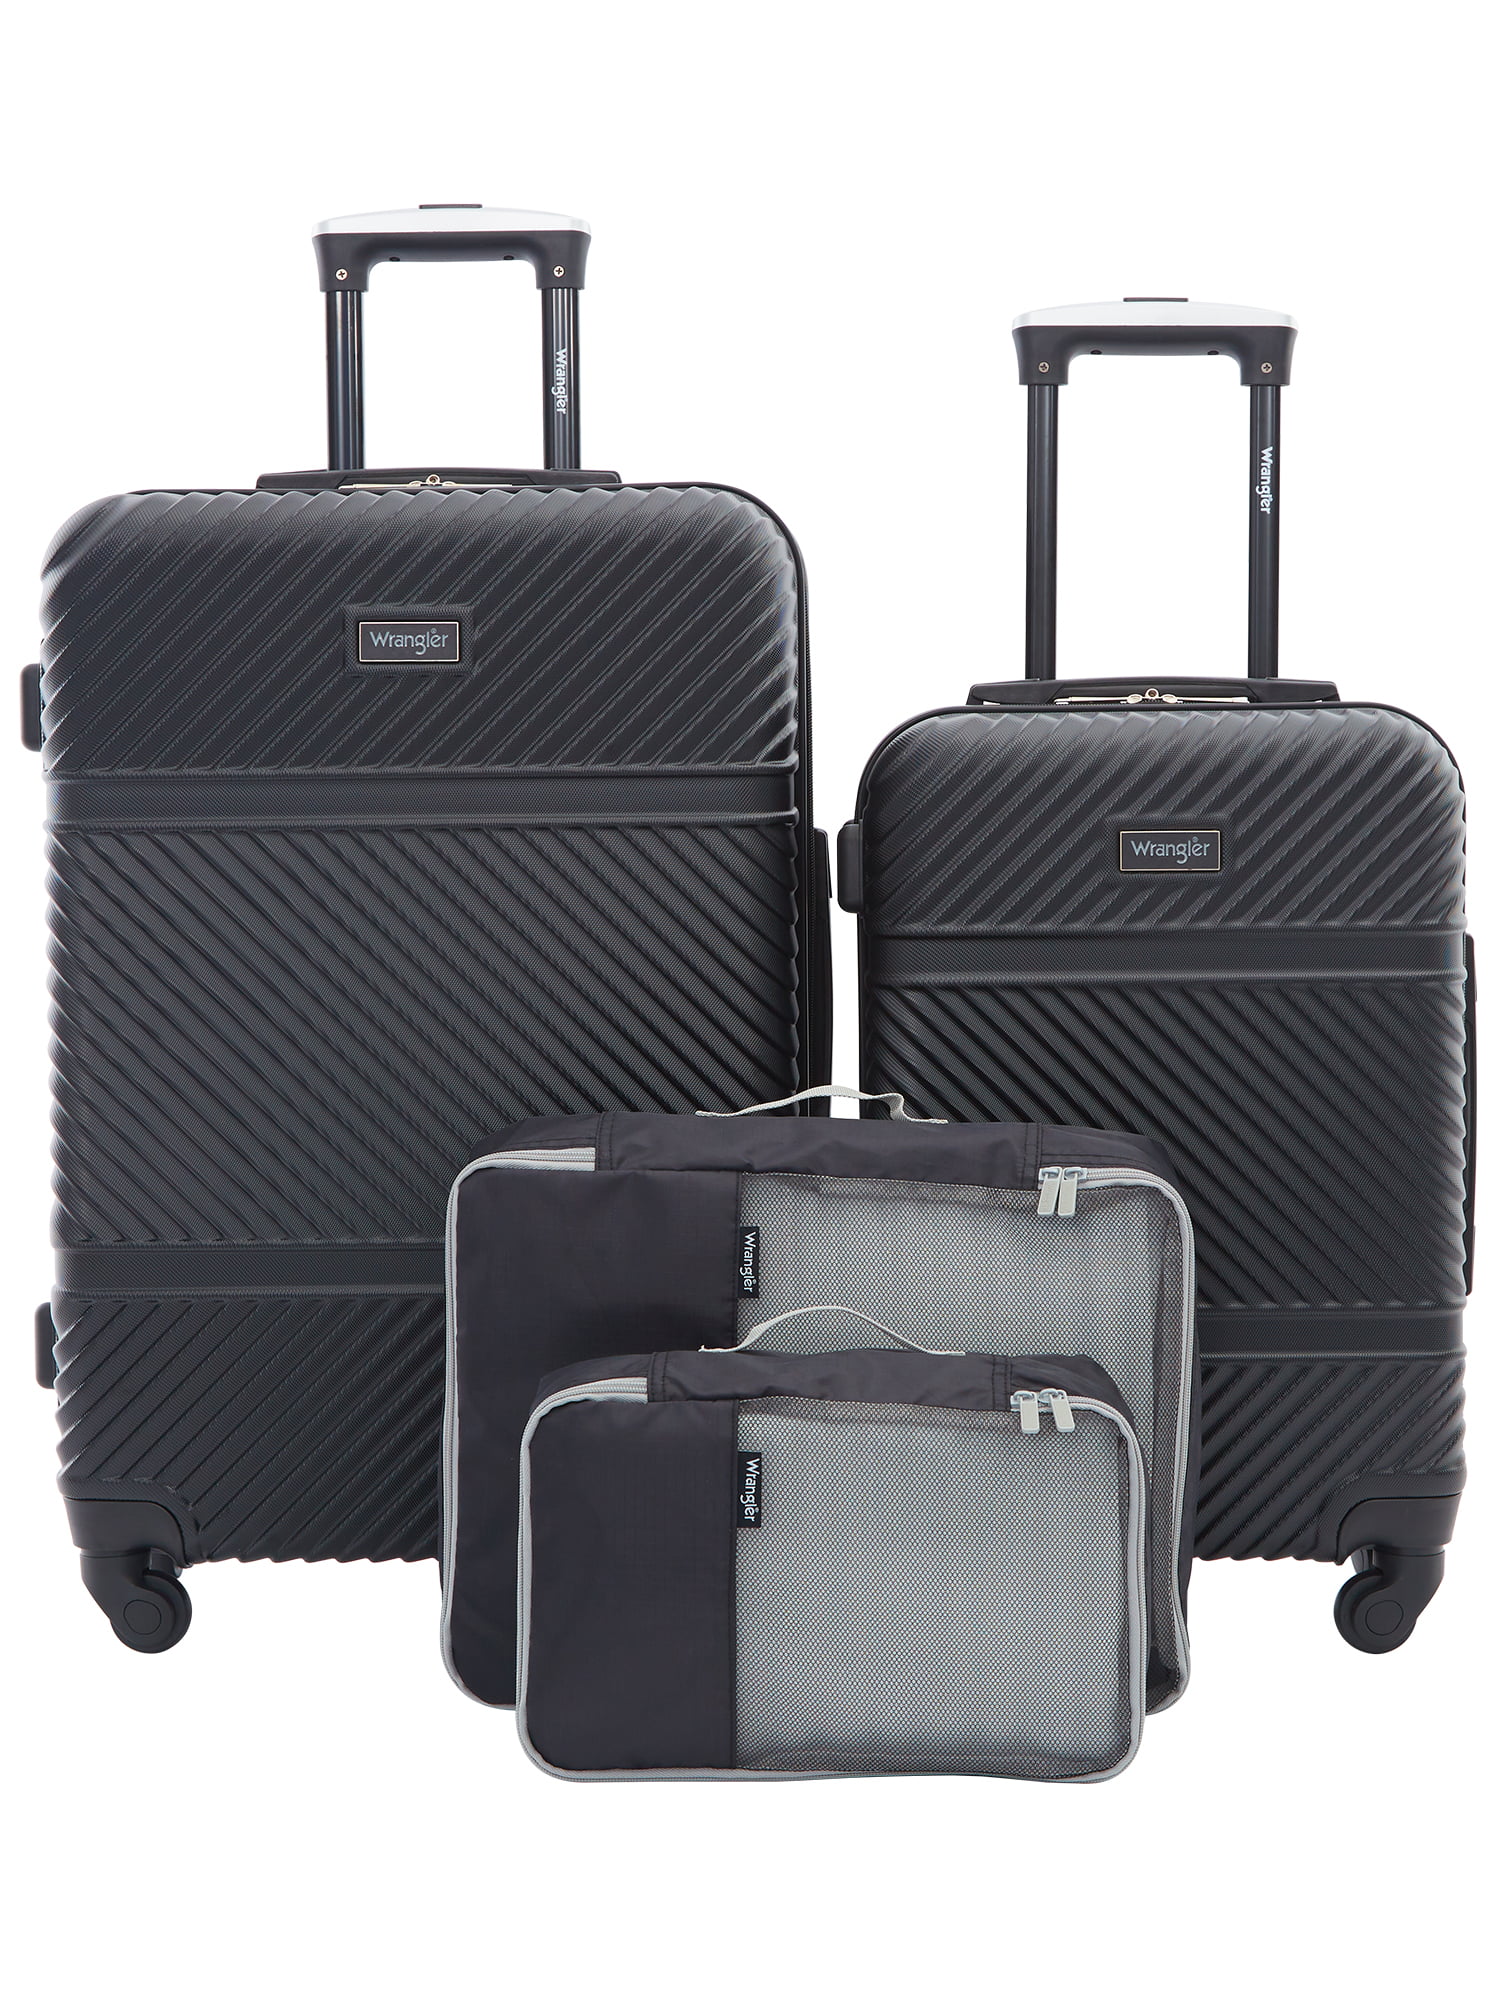 4-Piece Wrangler Hardside Spinner Luggage Set (various colors)